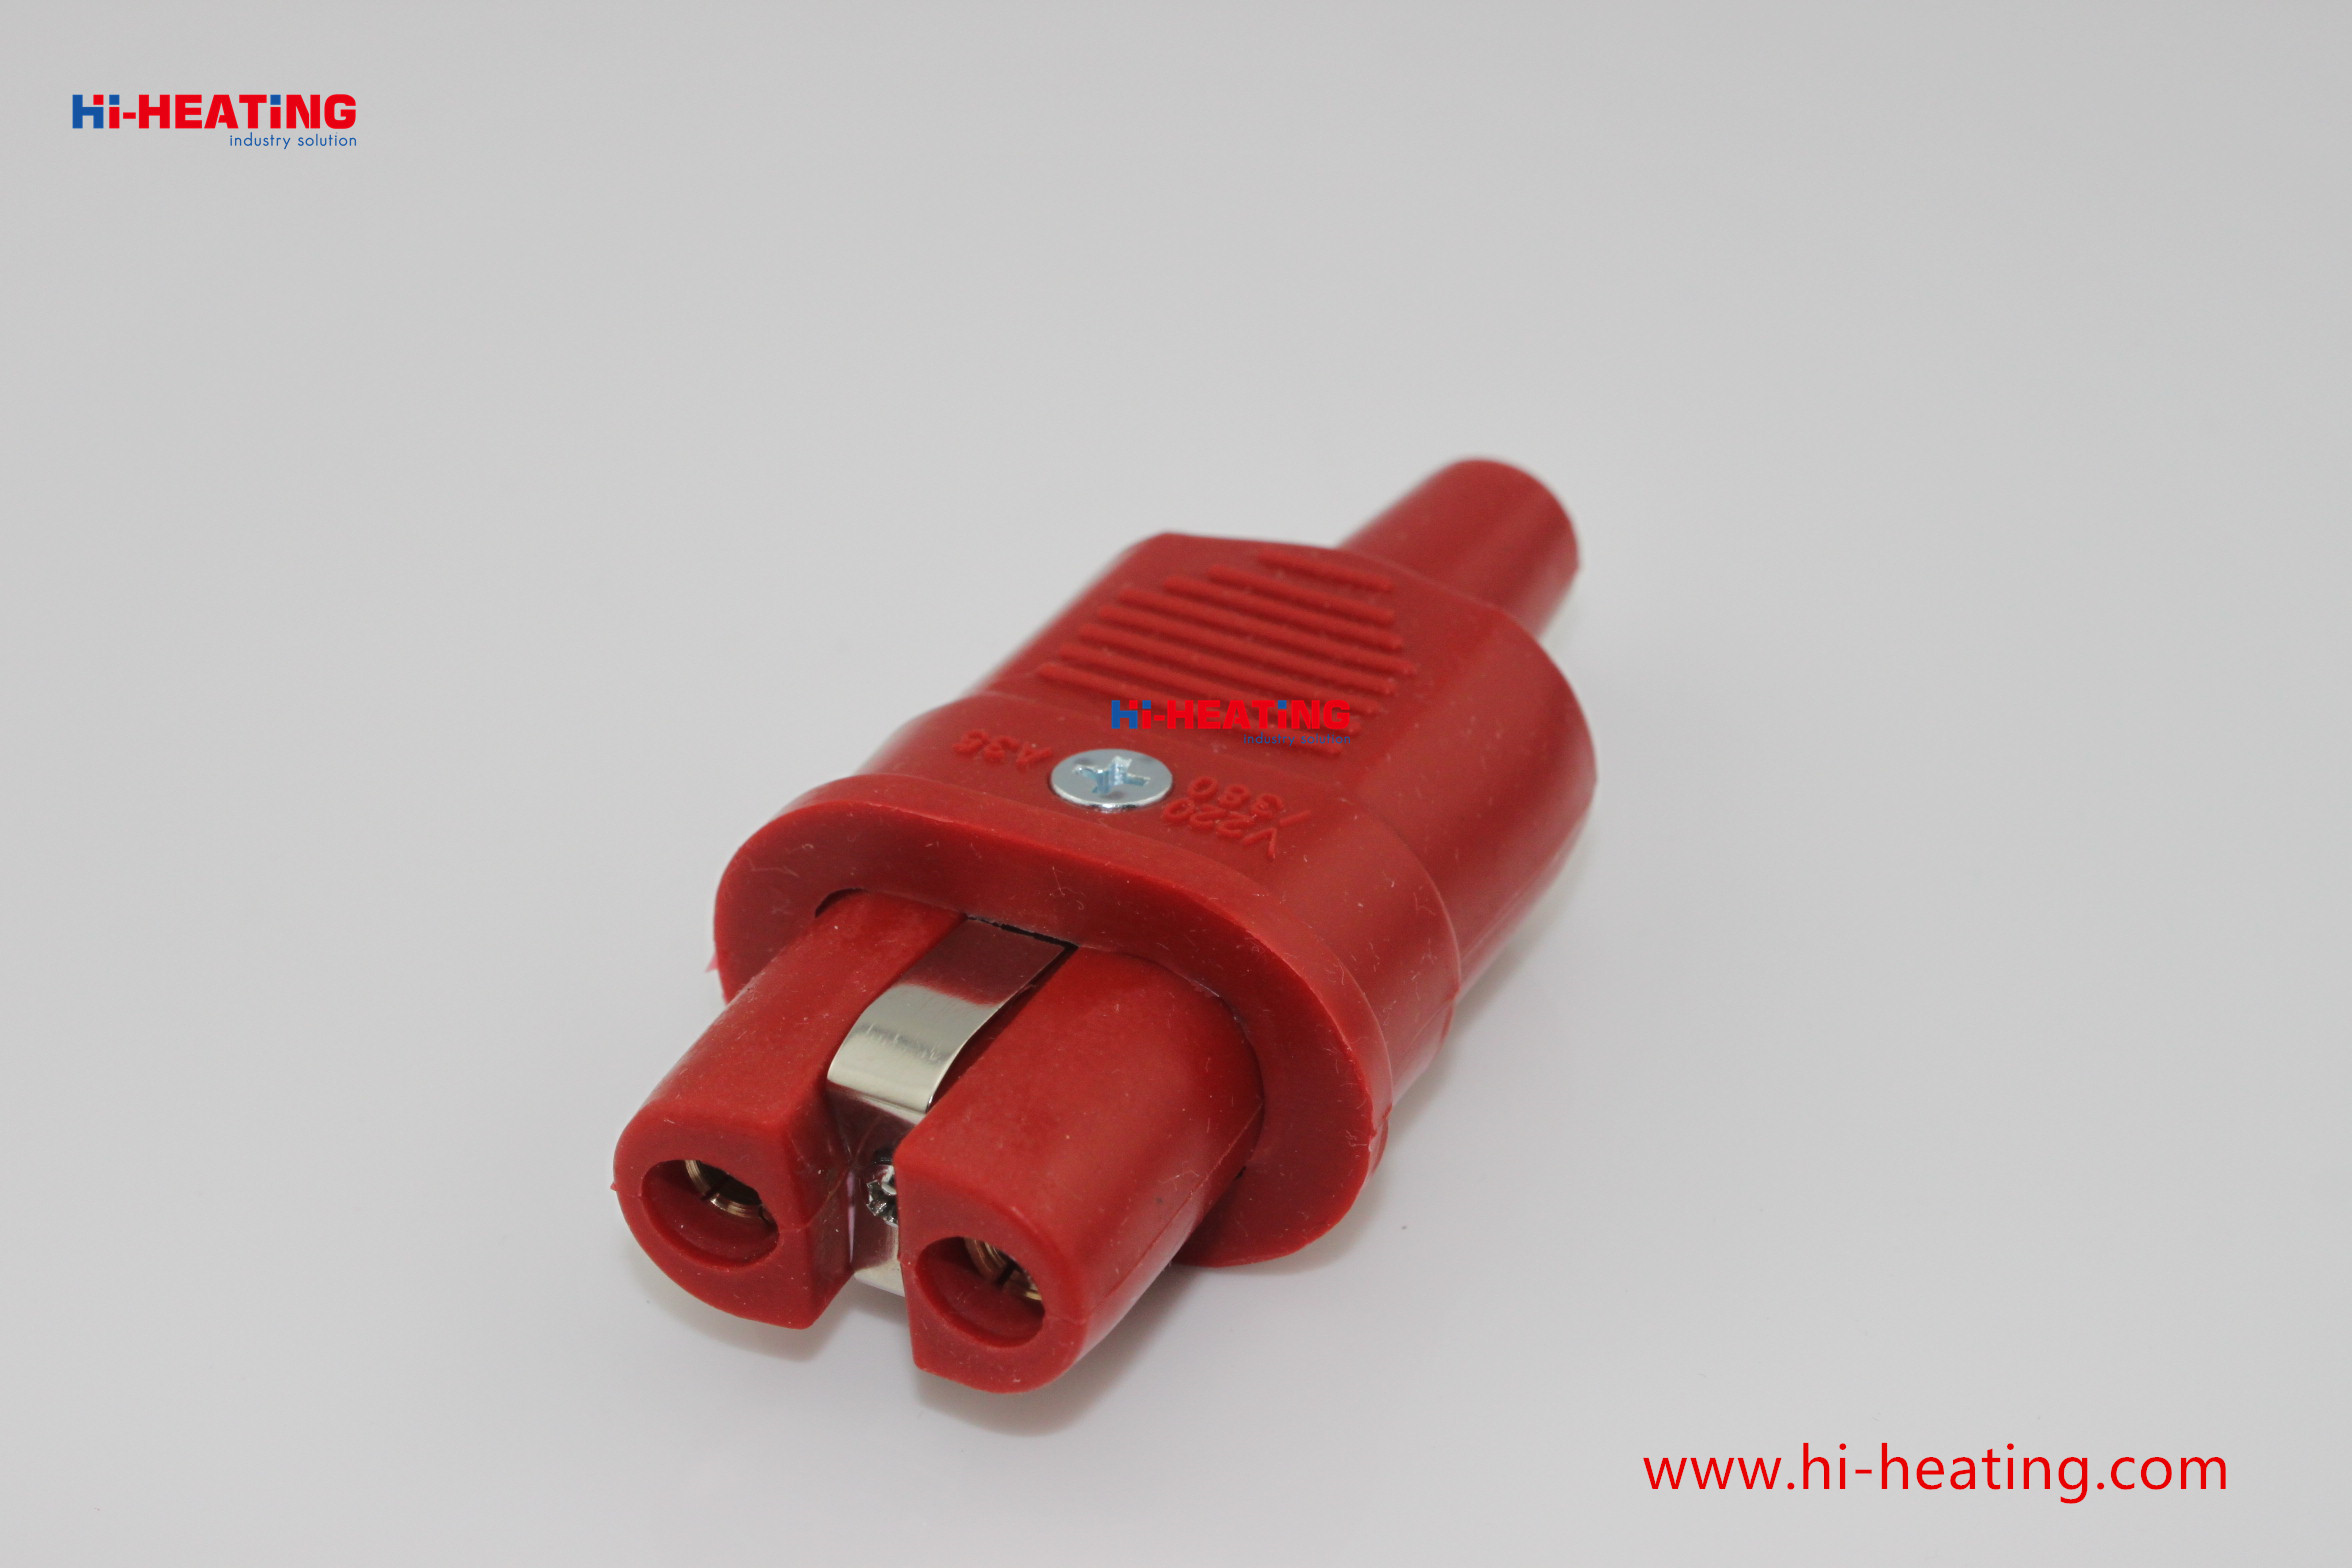 2022 years hot sales high temperature silicon plug good quality - 副本